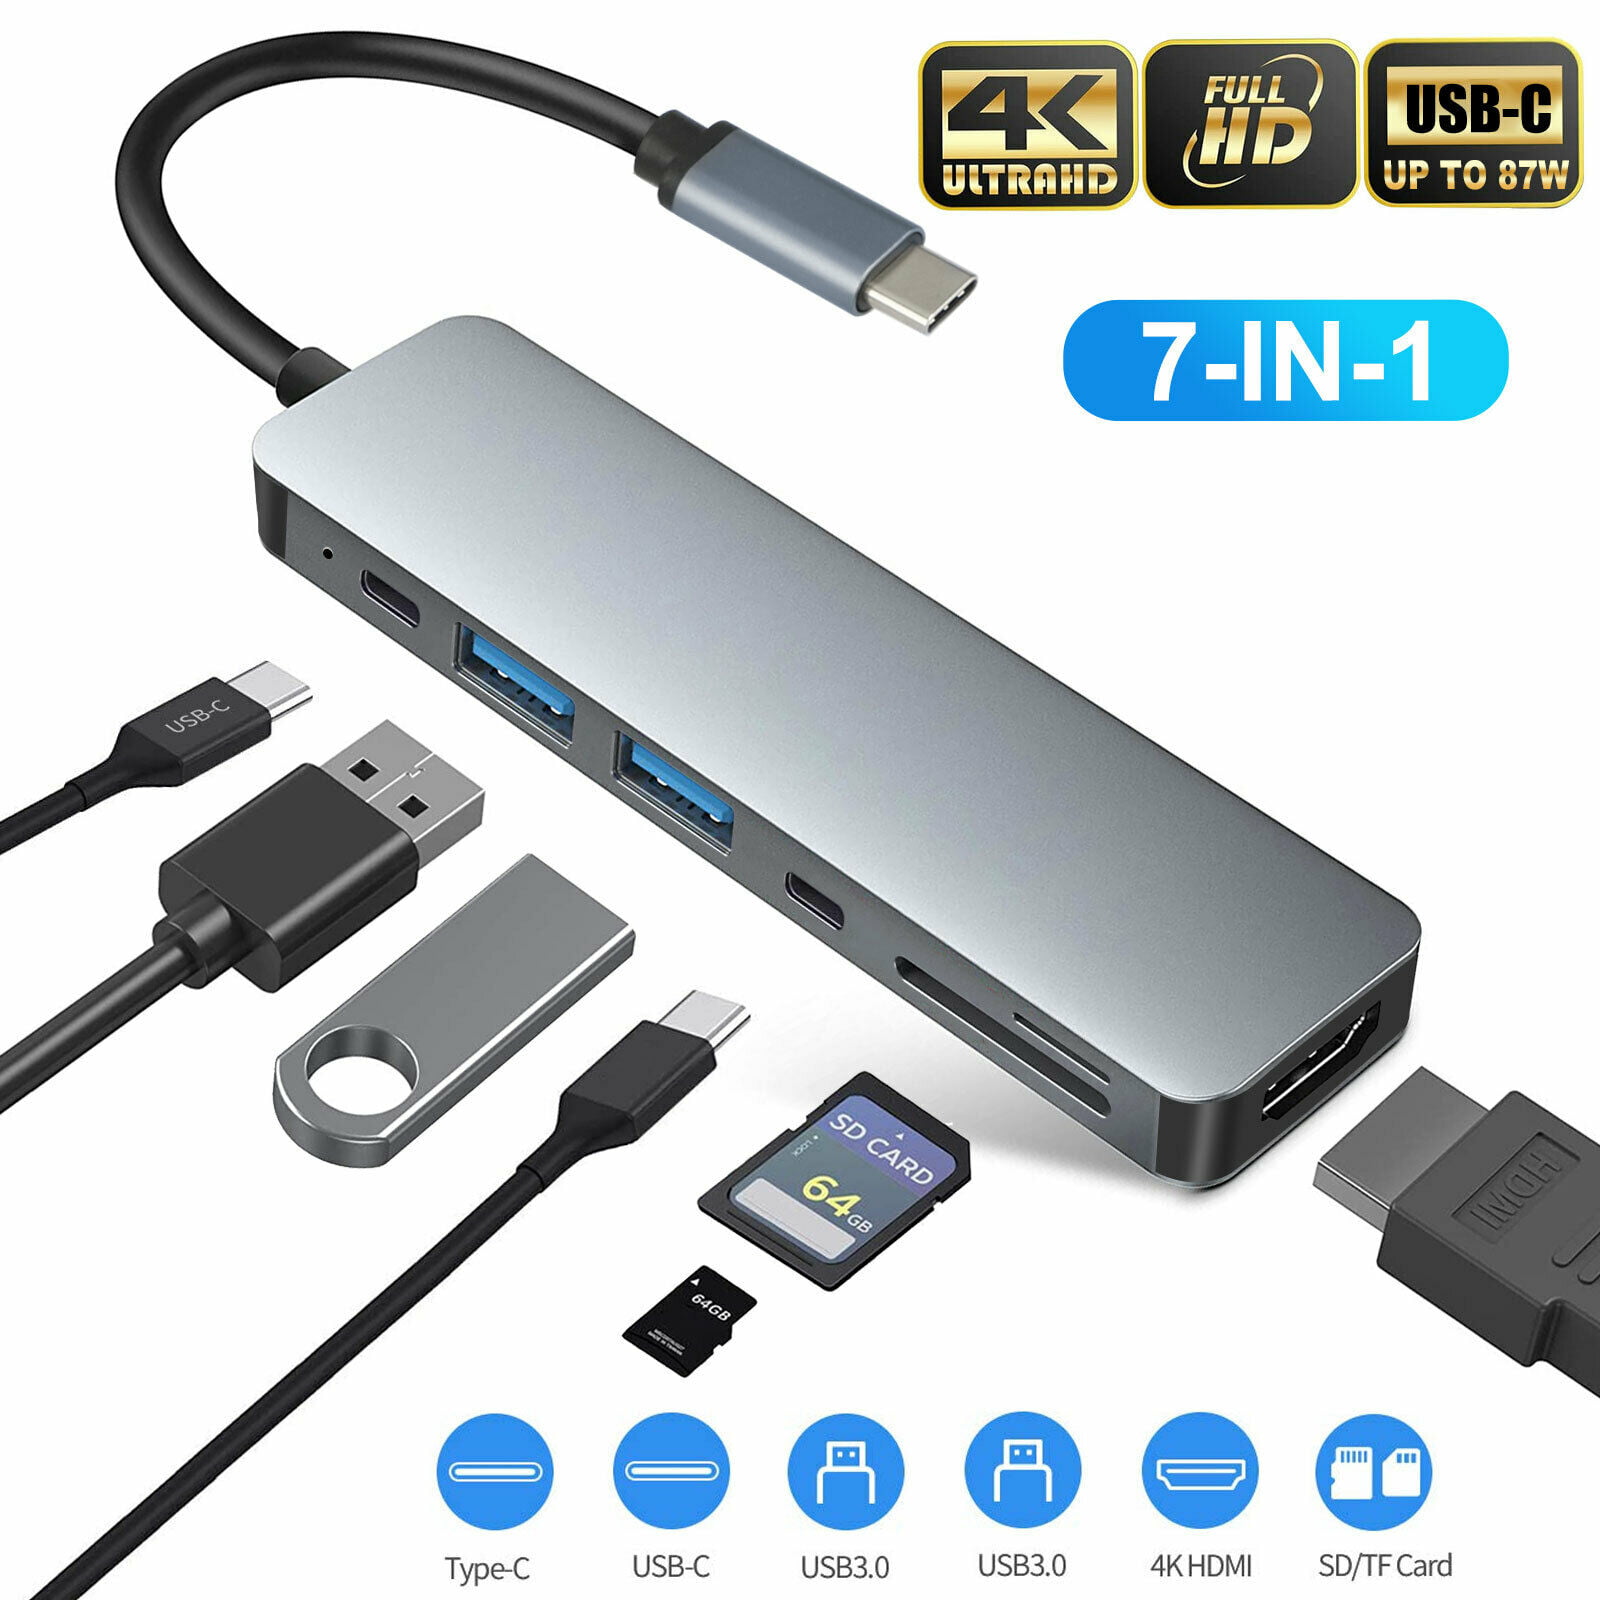 7in1 USB-C Hub Dual Type-C Multiport Card Reader Adapter 4K HDMI For MacBook Pro 